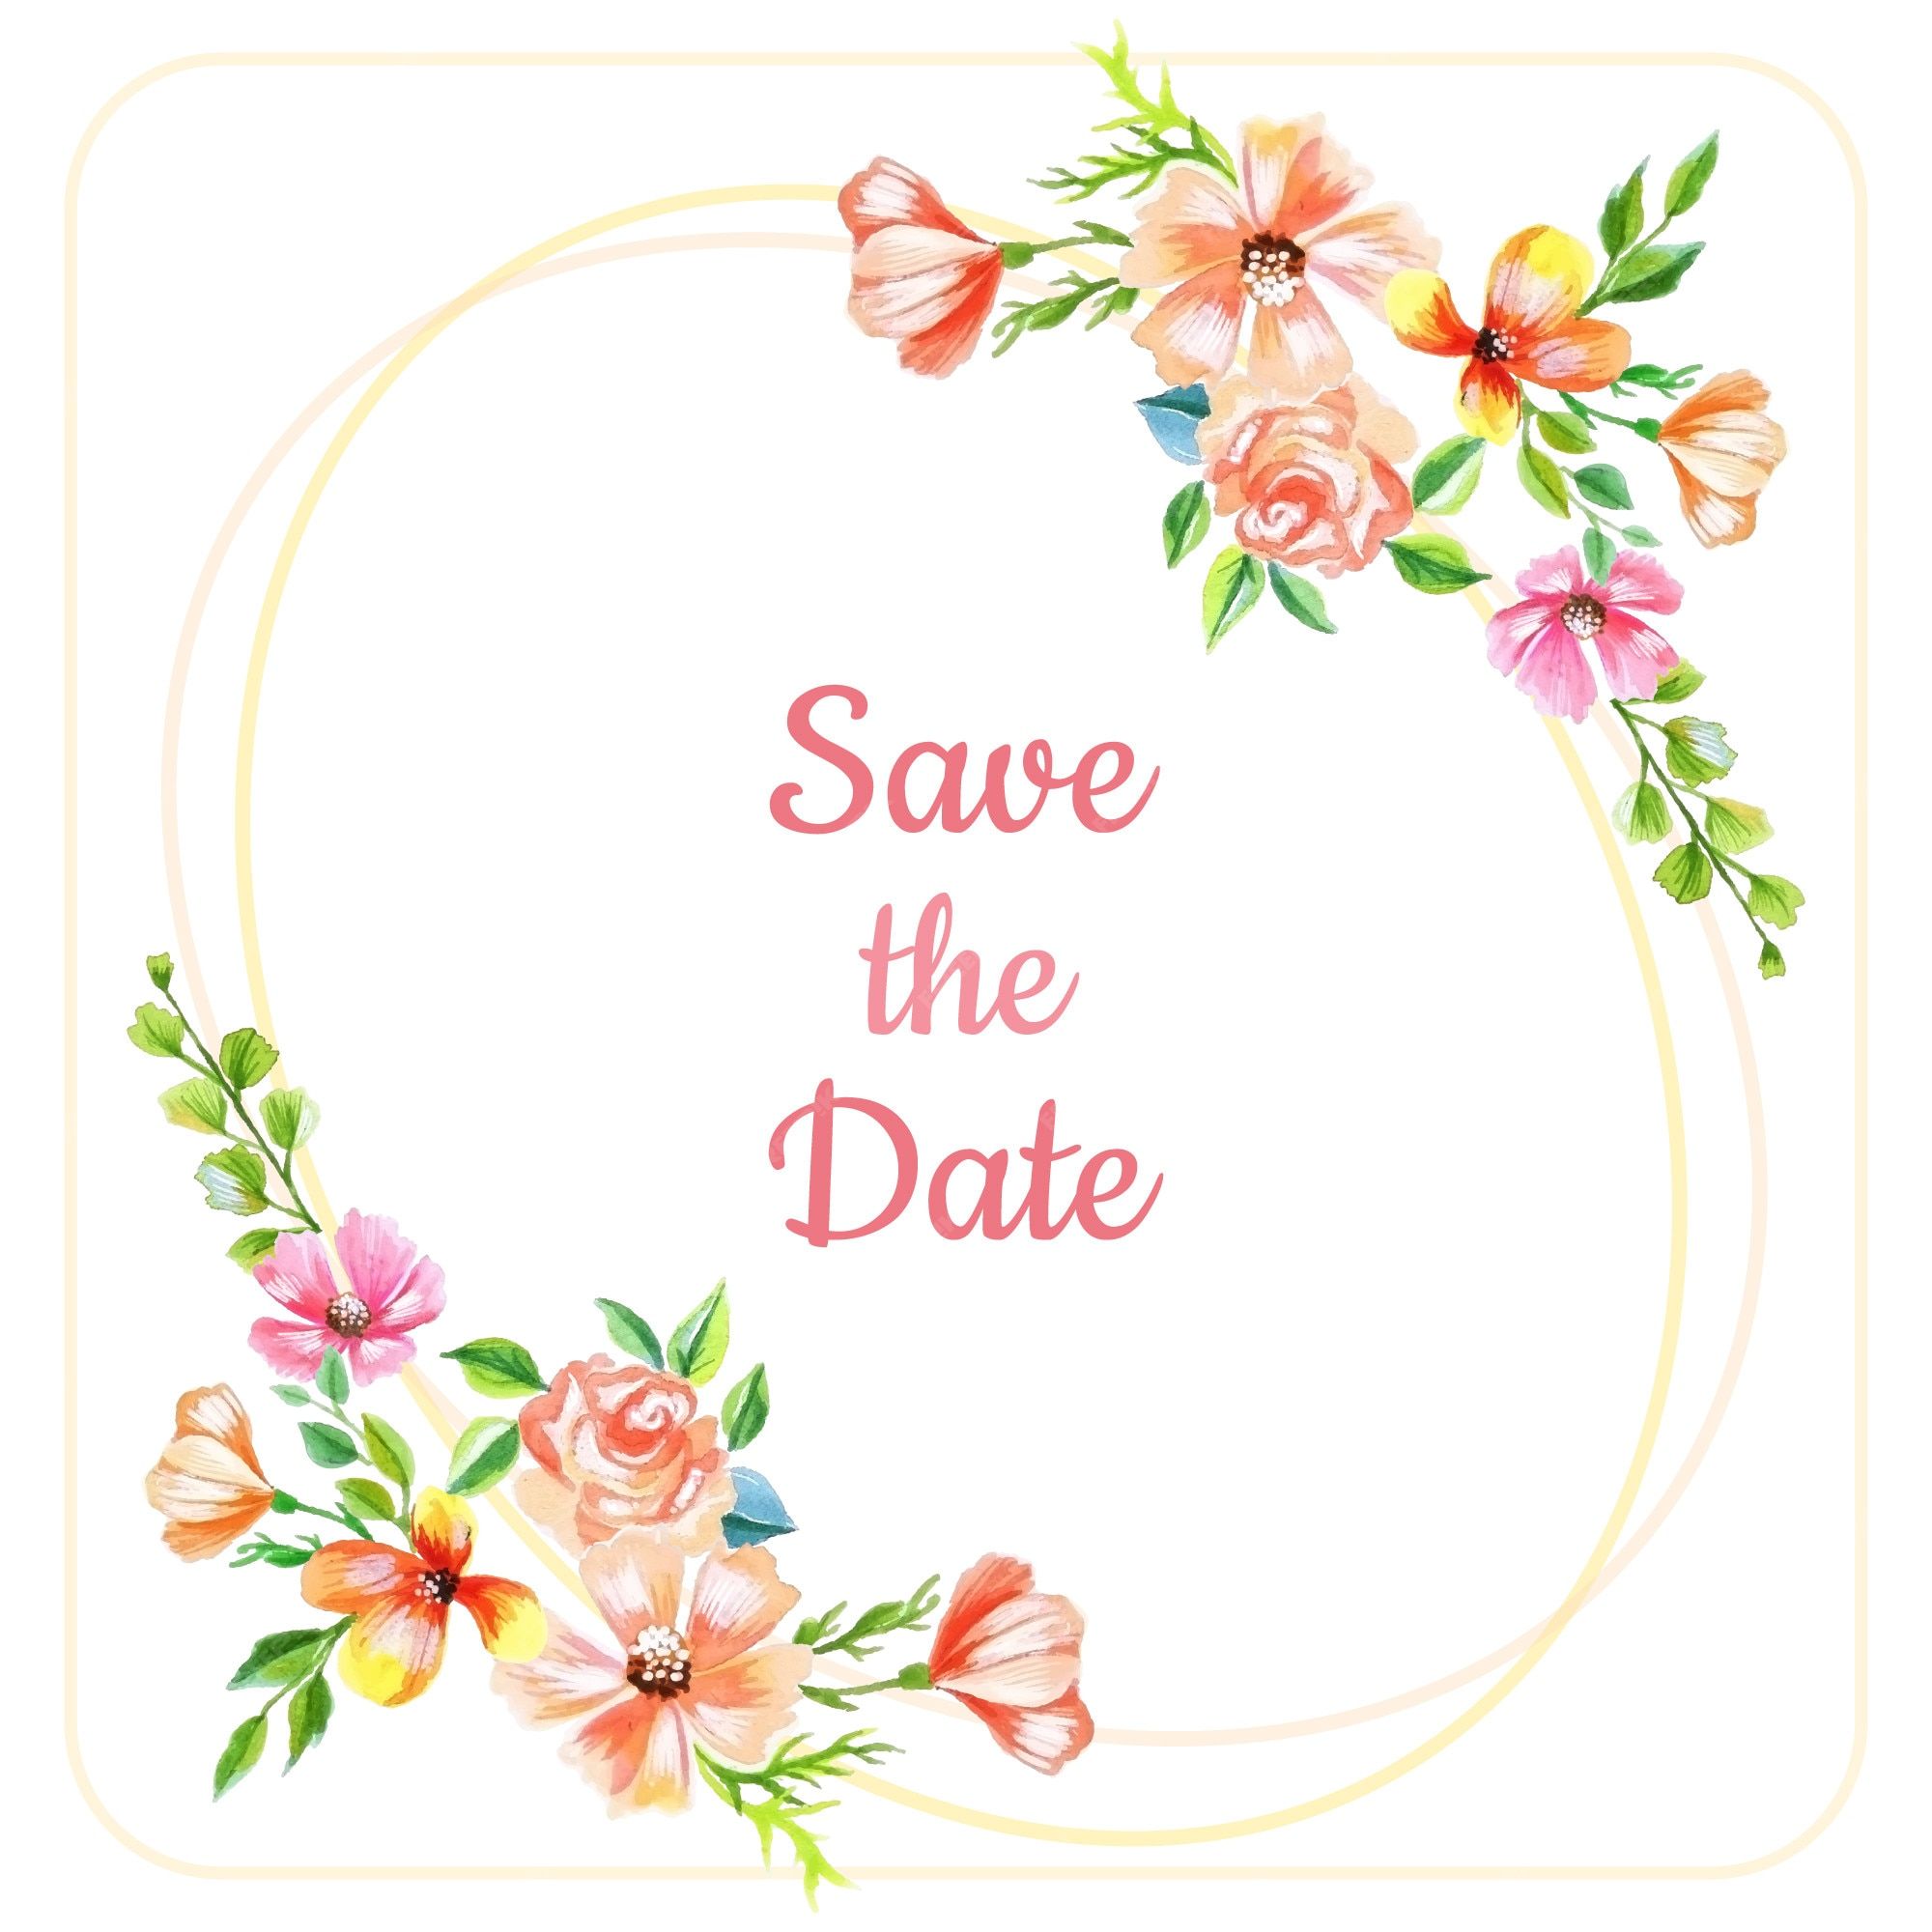 Save The Date Wallpapers - Top Free Save The Date Backgrounds ...